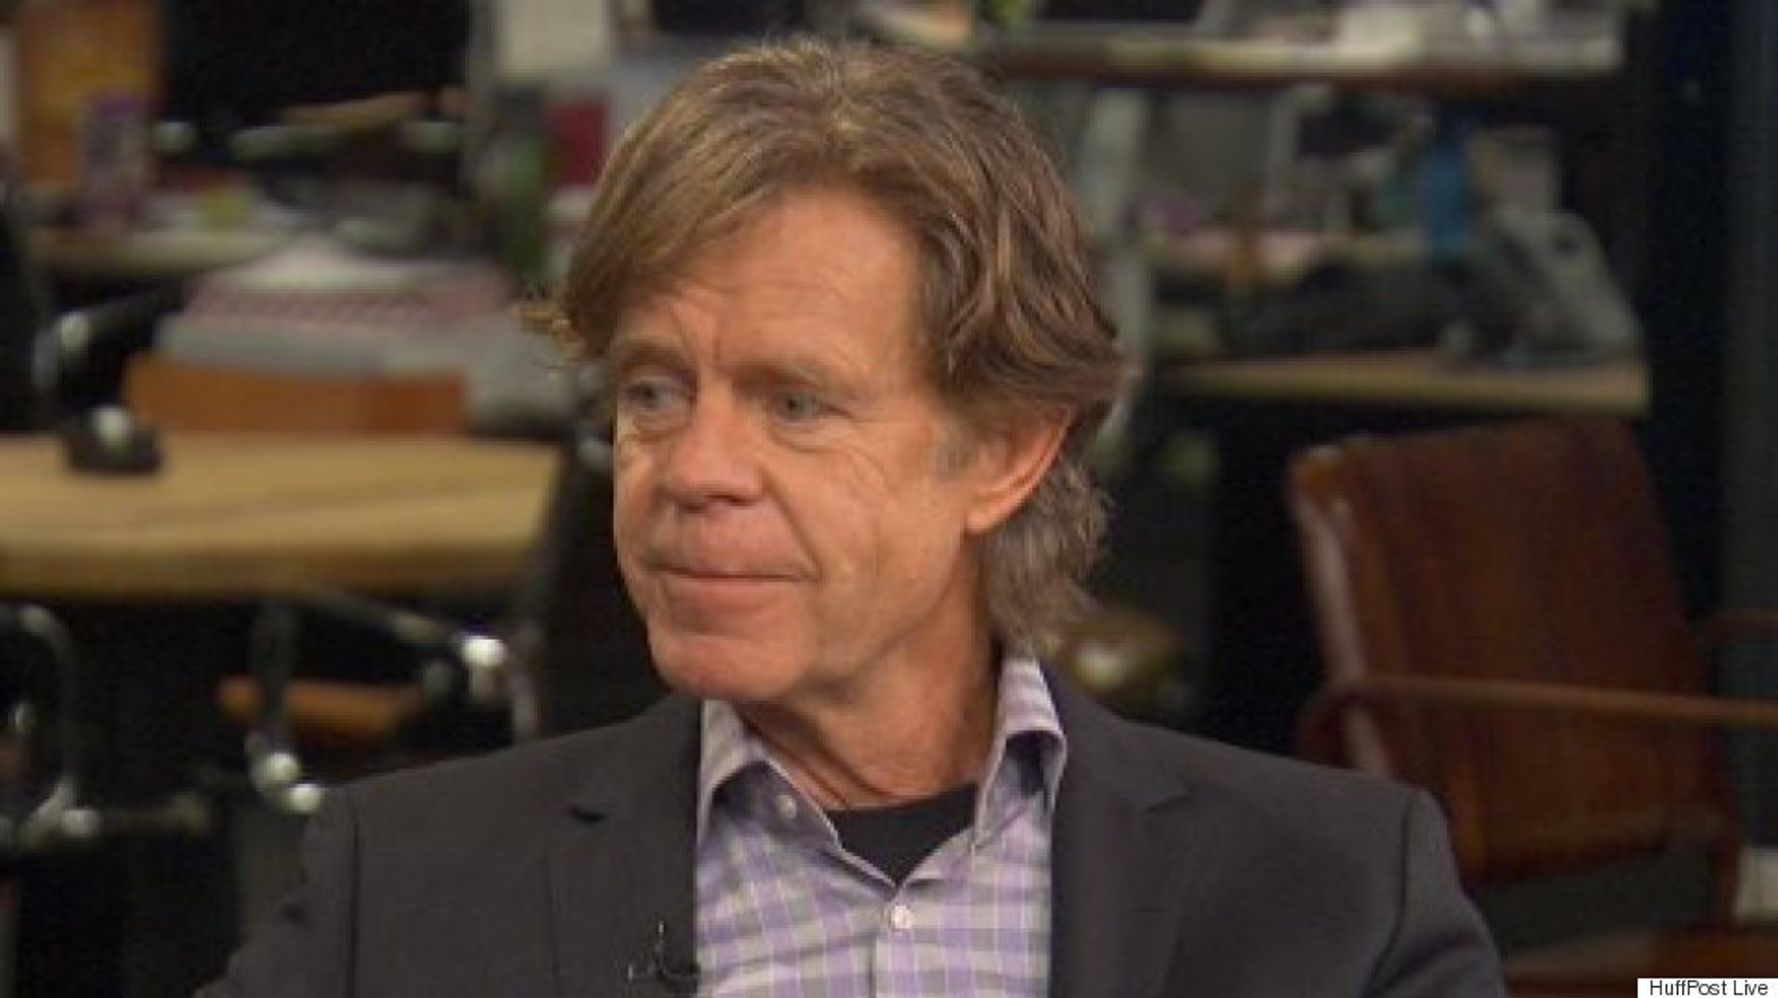 William H Macy Is Tired Of Scenes Where Things Get Shoved Up His Butt